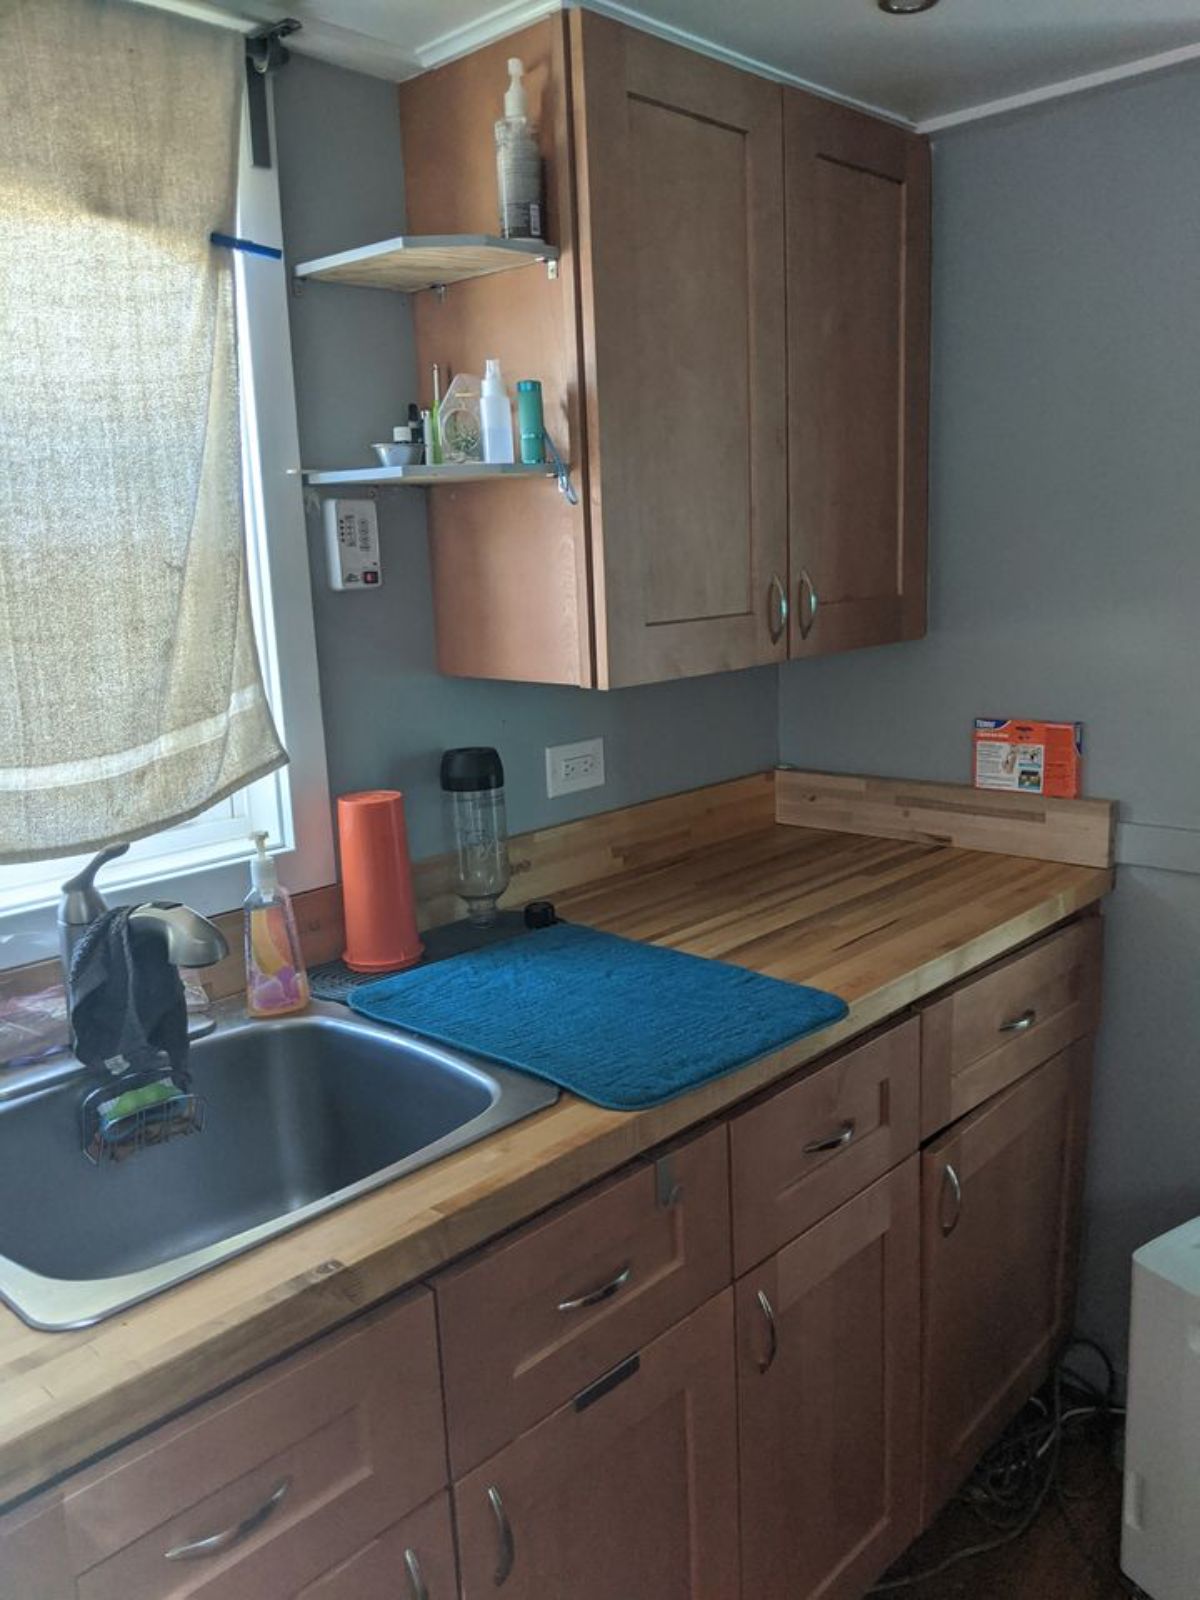 Kitchen of 196 sf Tiny House on Wheels has a sink and wooden cabinet with drawers